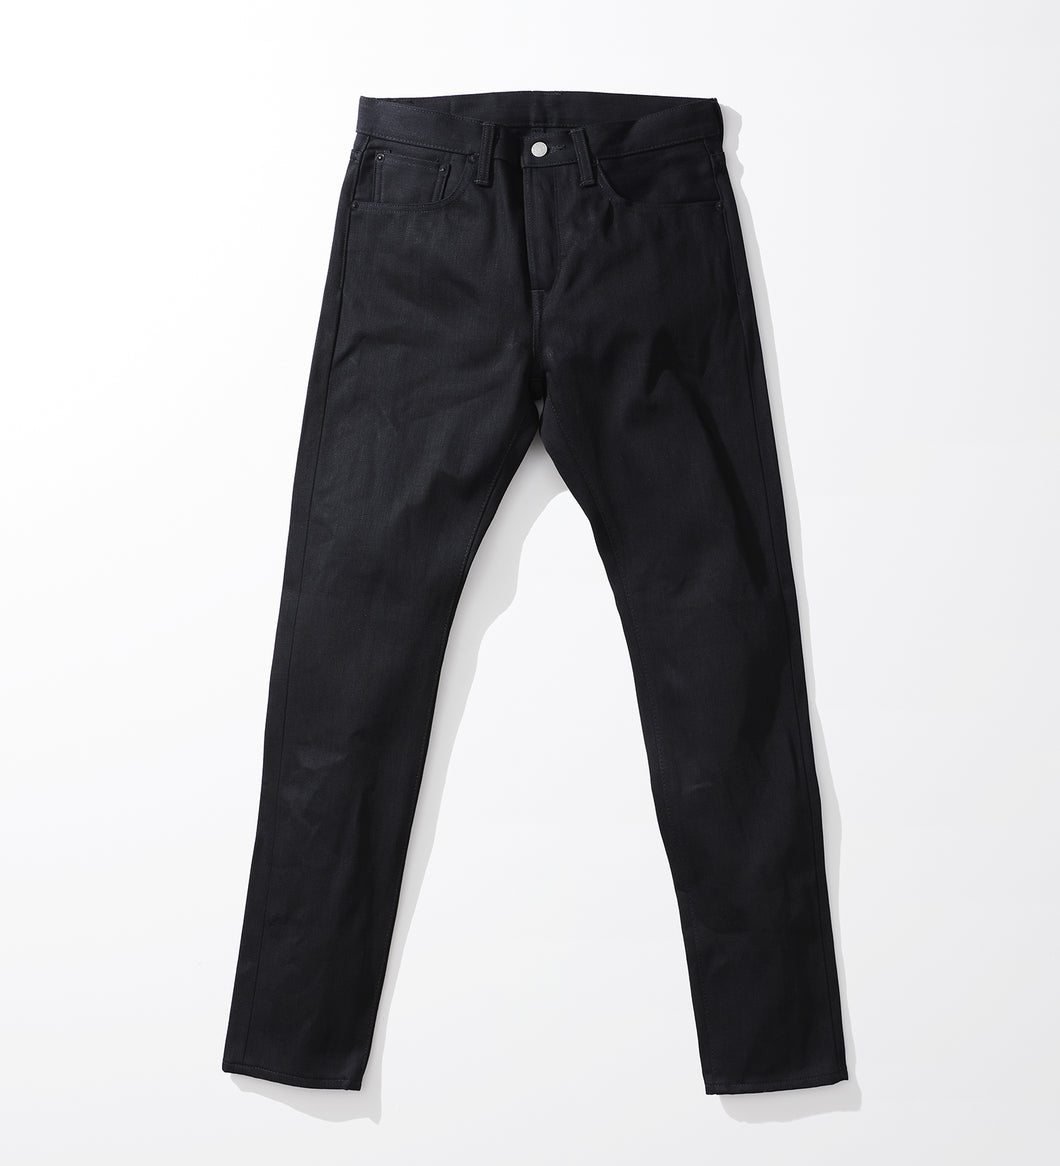 SLIM TAPERED Black Unwashed [Length 30 inch]